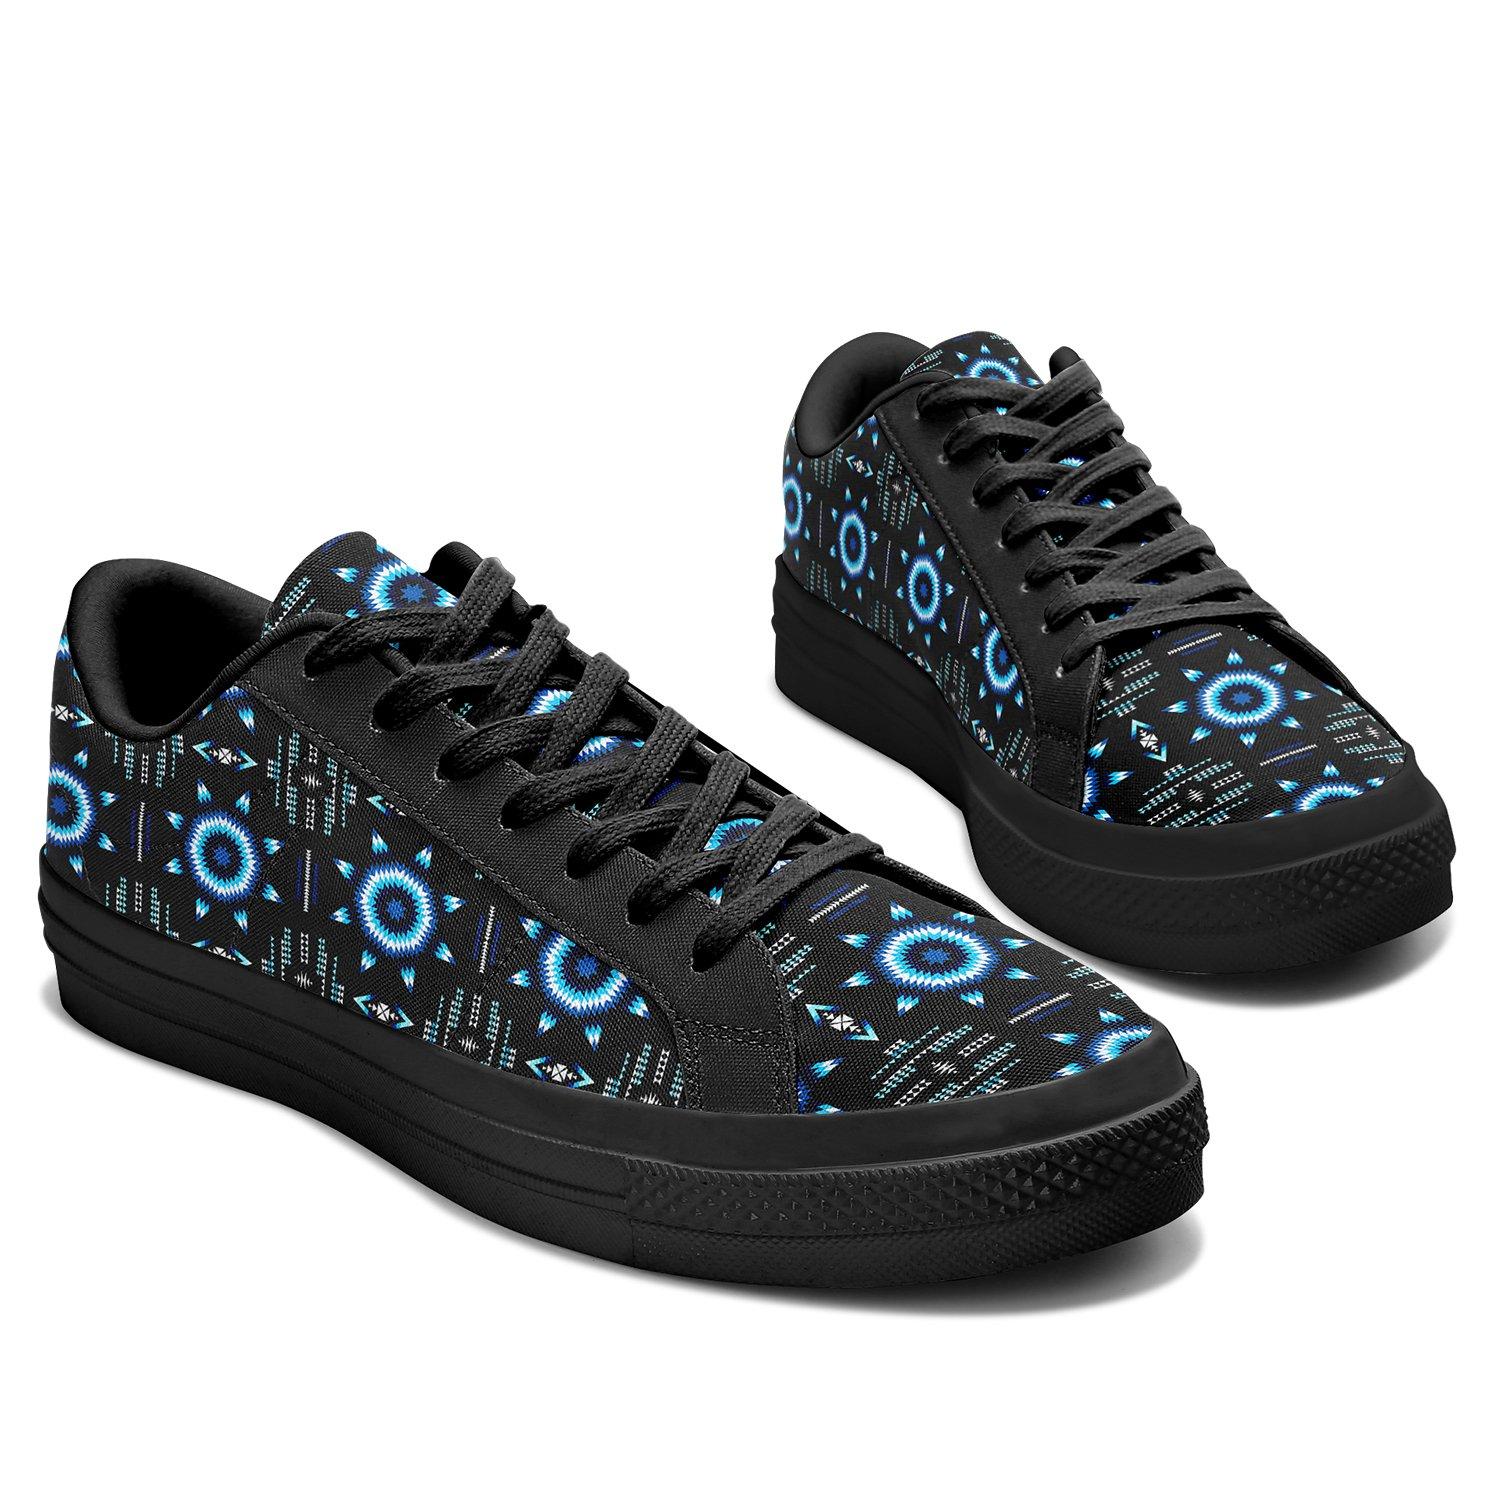 Rising Star Wolf Moon Aapisi Low Top Canvas Shoes Black Sole 49 Dzine 